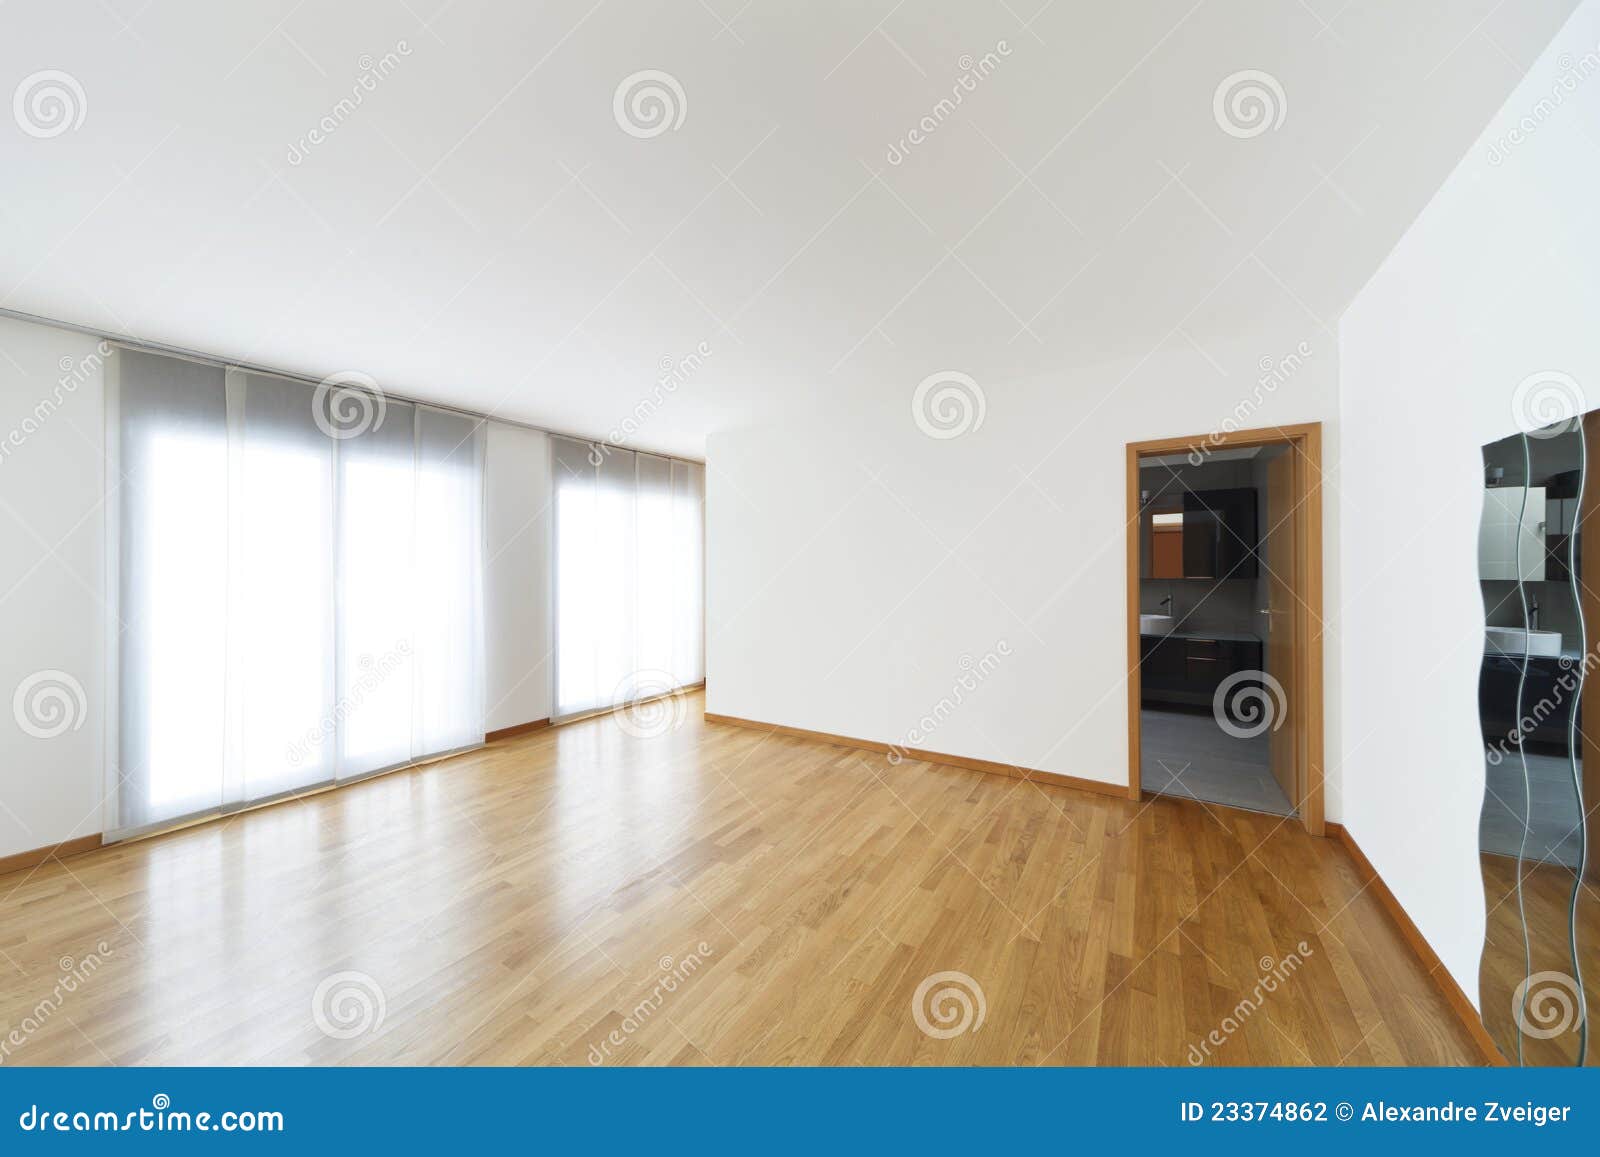 Mirror And Window In Empty Room Stock Photography - Image ...
